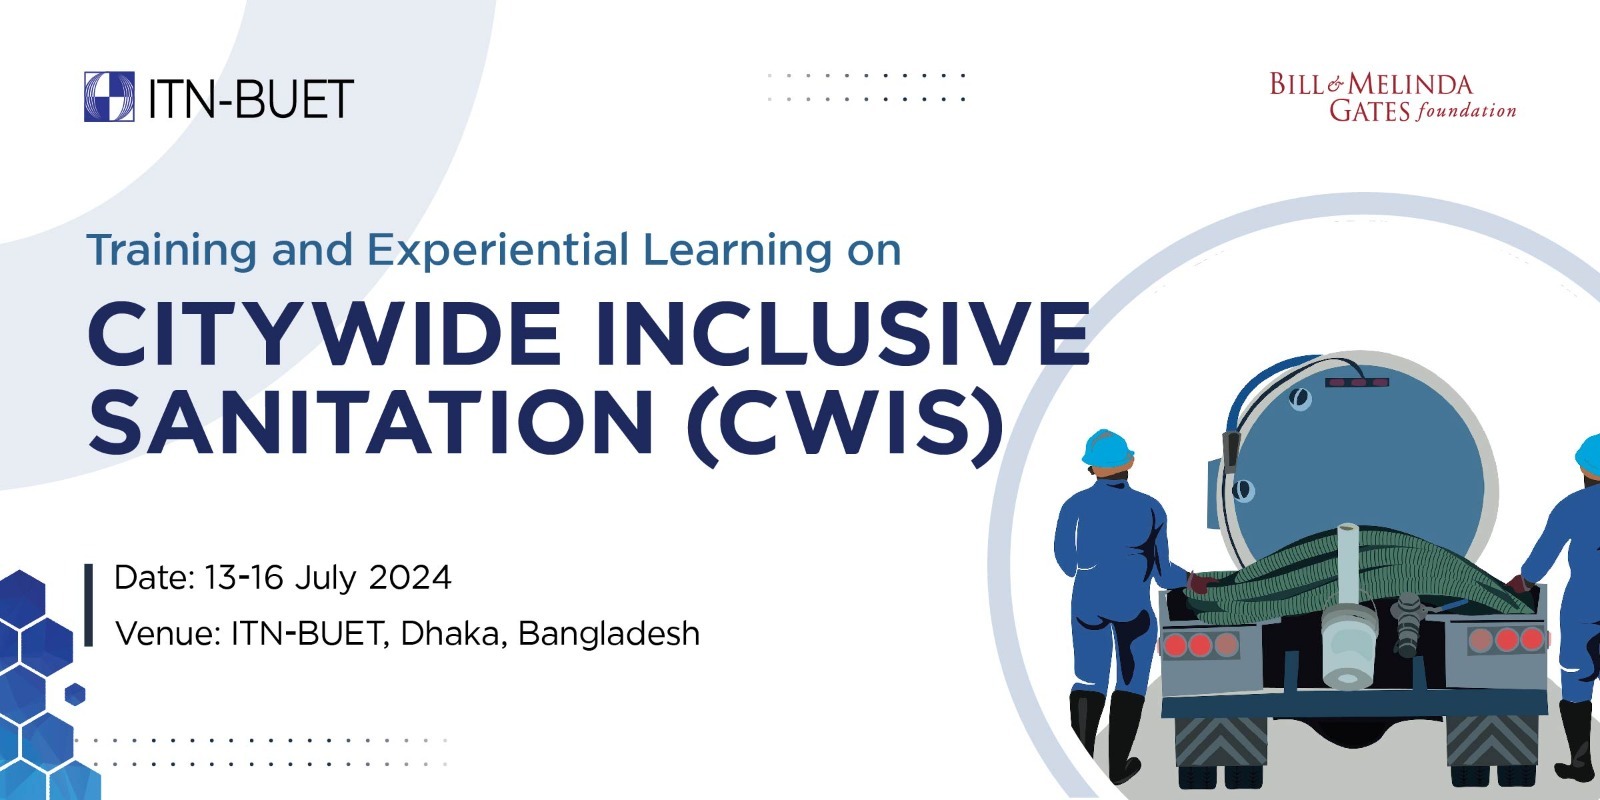 Training and Experiential Learning on Citywide Inclusive Sanitation (CWIS)